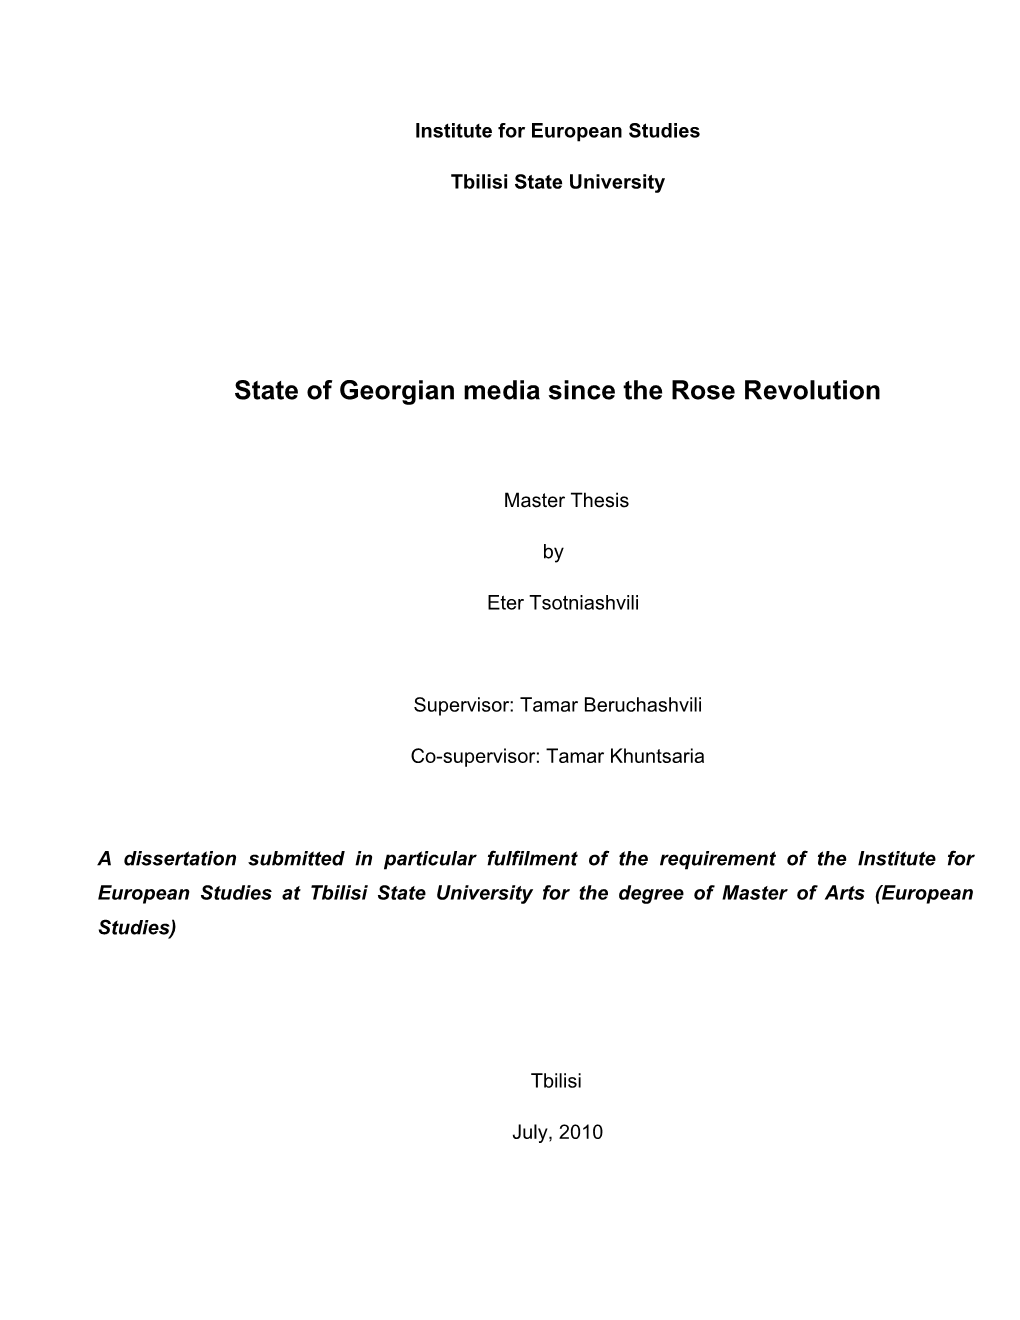 State of Georgian Media Since the Rose Revolution